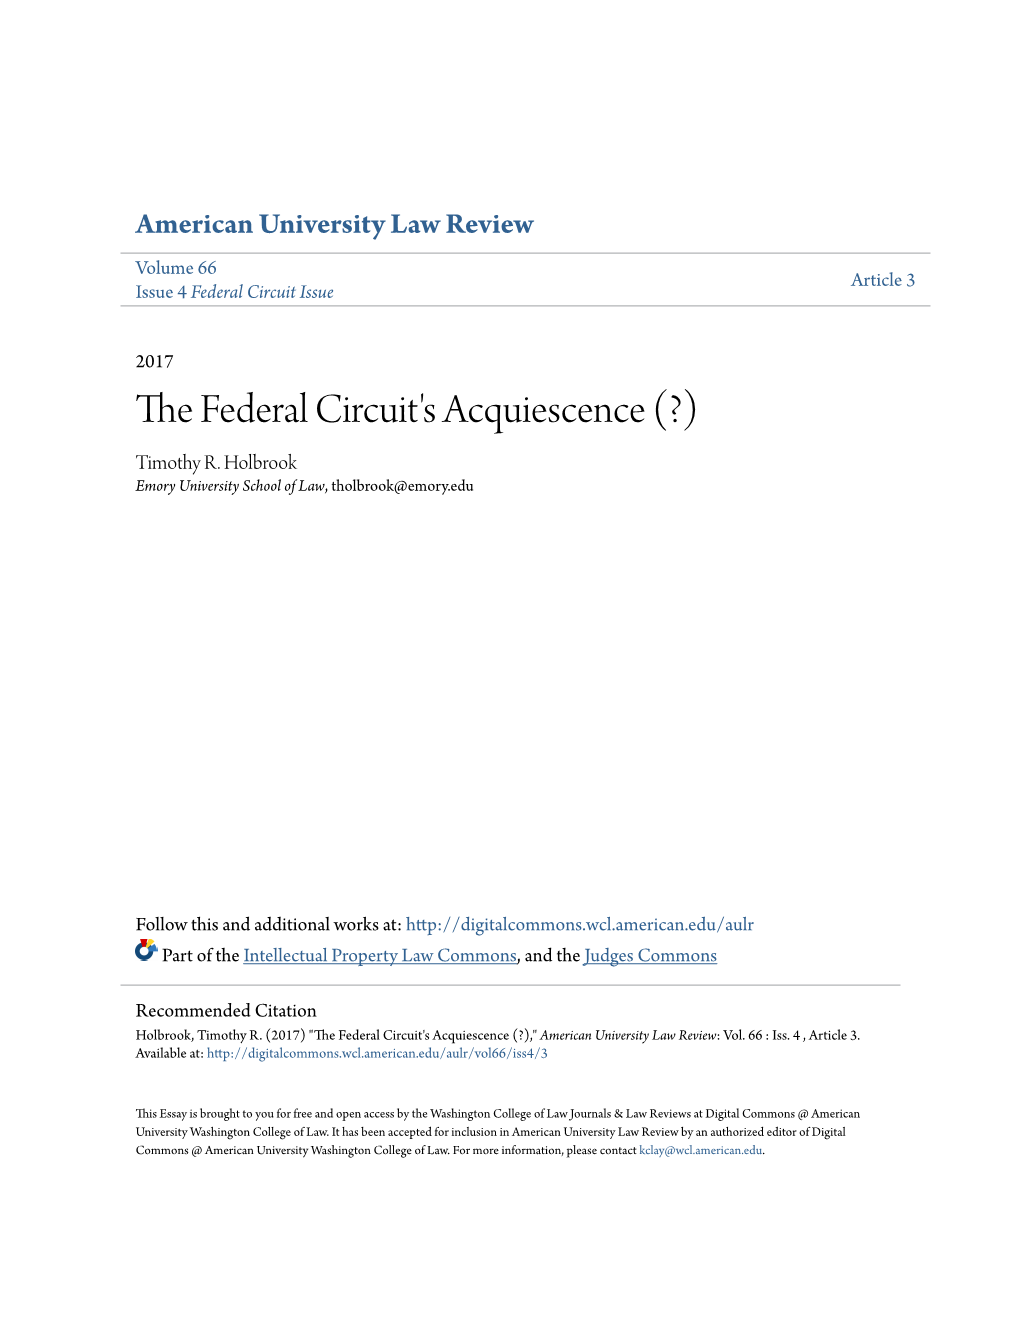 The Federal Circuit's Acquiescence